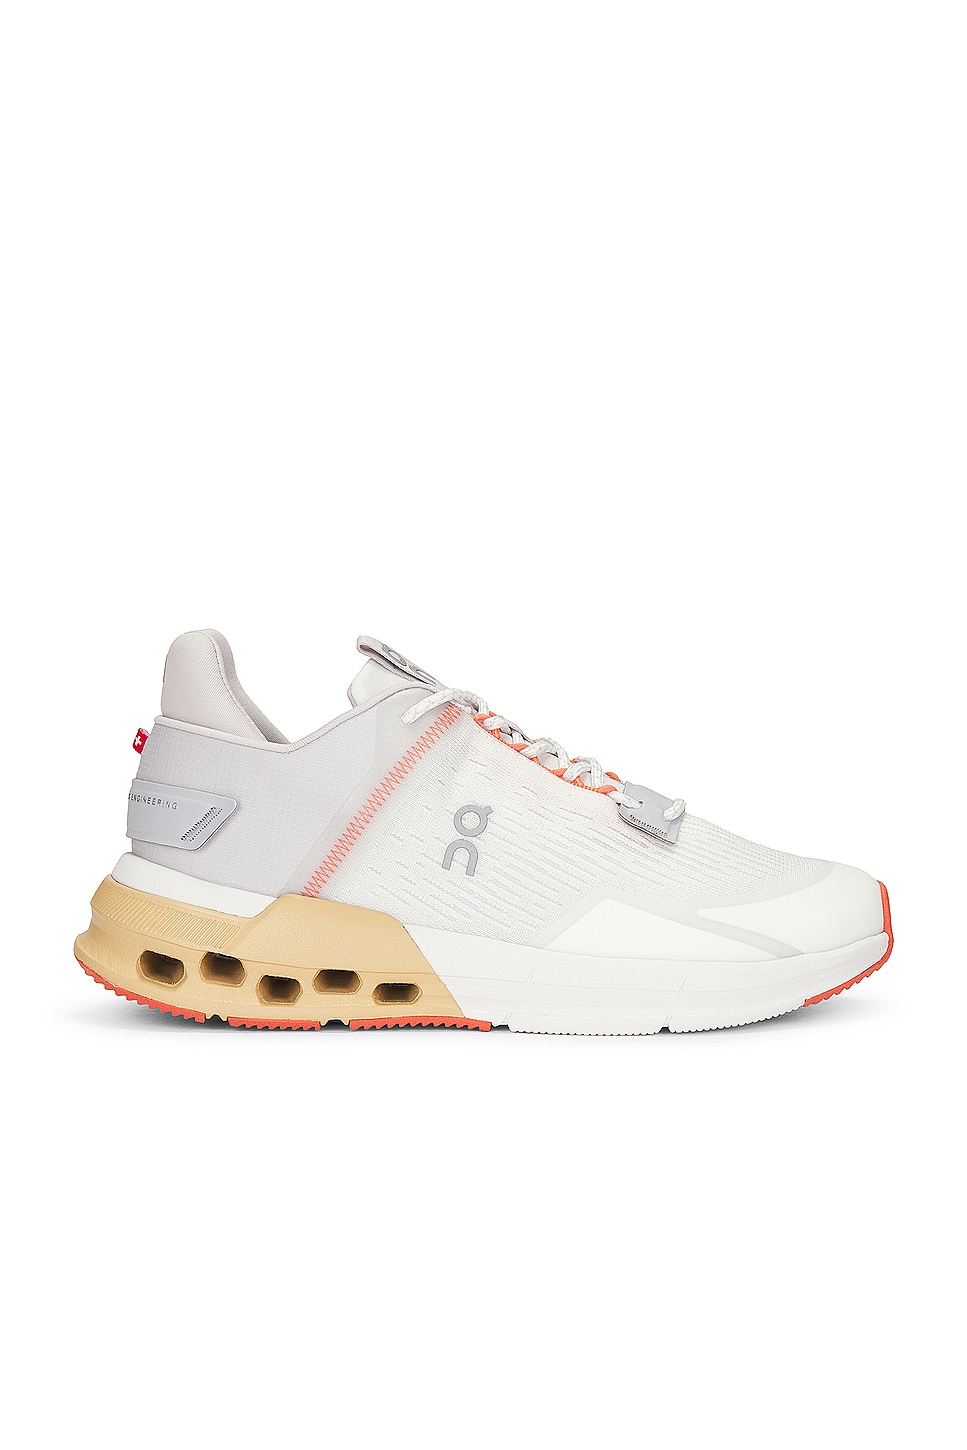 Image 1 of On Cloudnova Flux Sneaker in Undyed White & Savannah